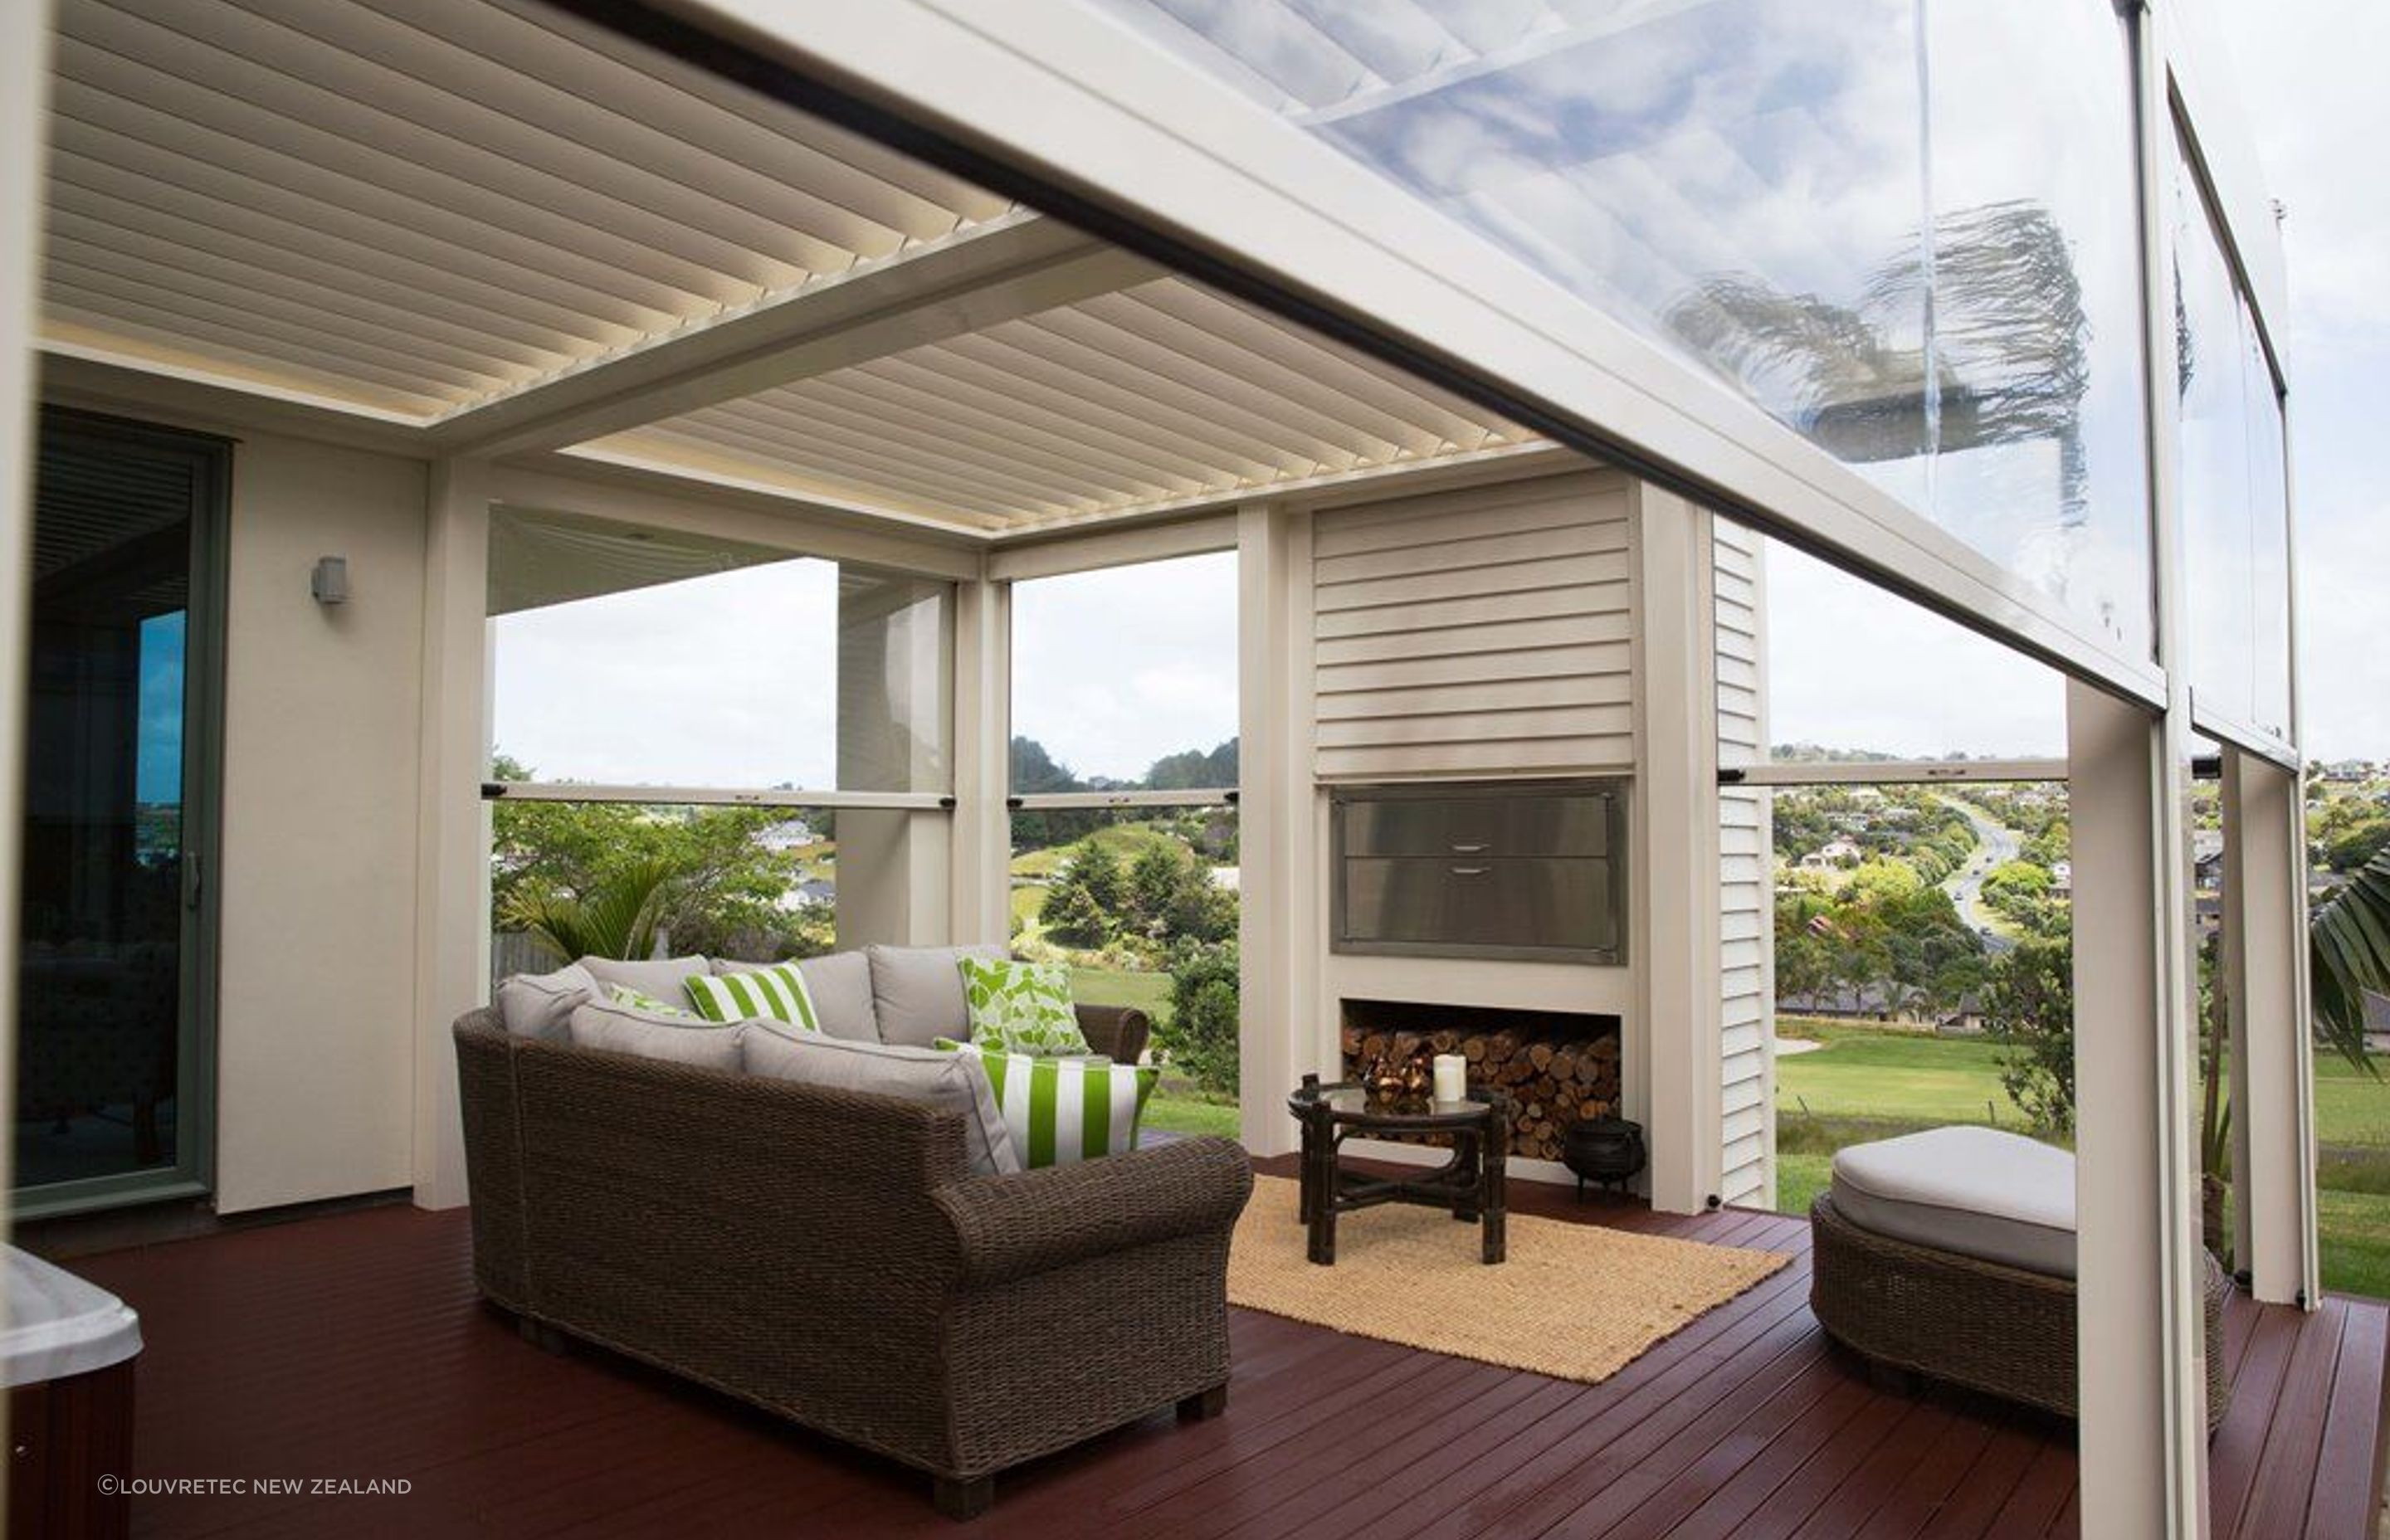 PVC blinds, like these outdoor blinds by Louvretec, have many great qualities like durability and heat retention